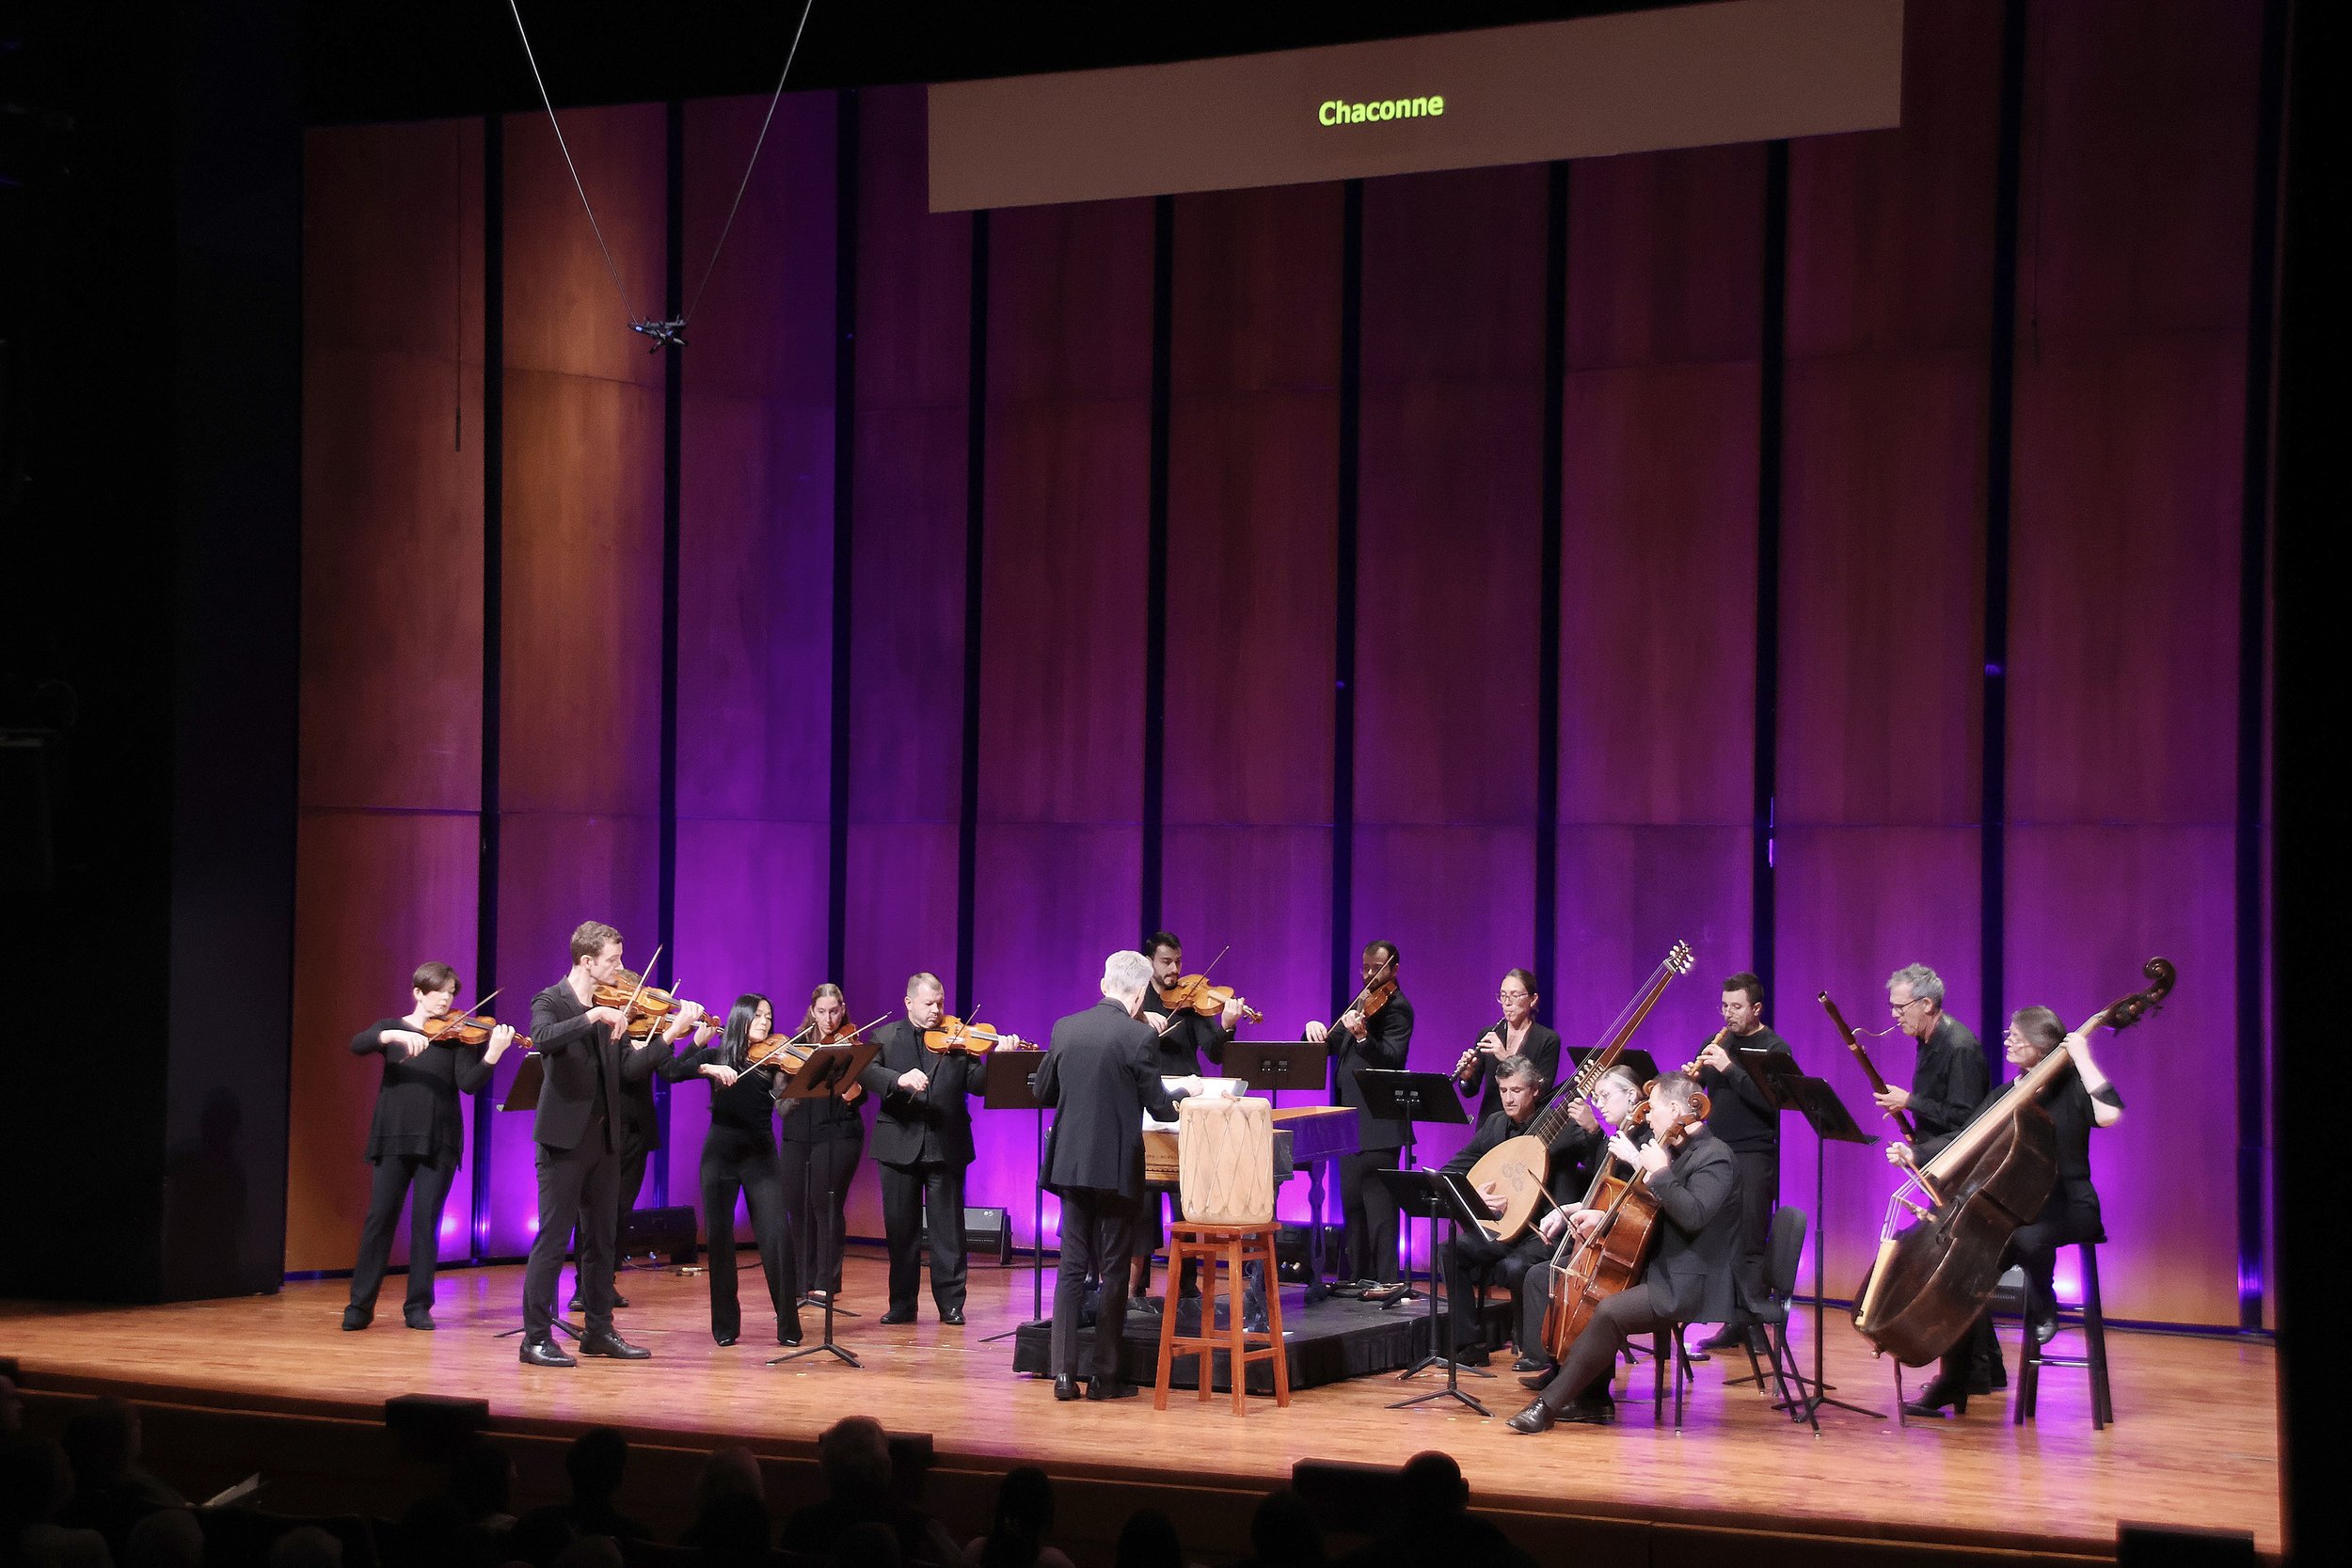 Ecstatic Visions - Full orchestra shot, Chaconne - Photo by Pin Lim.jpg